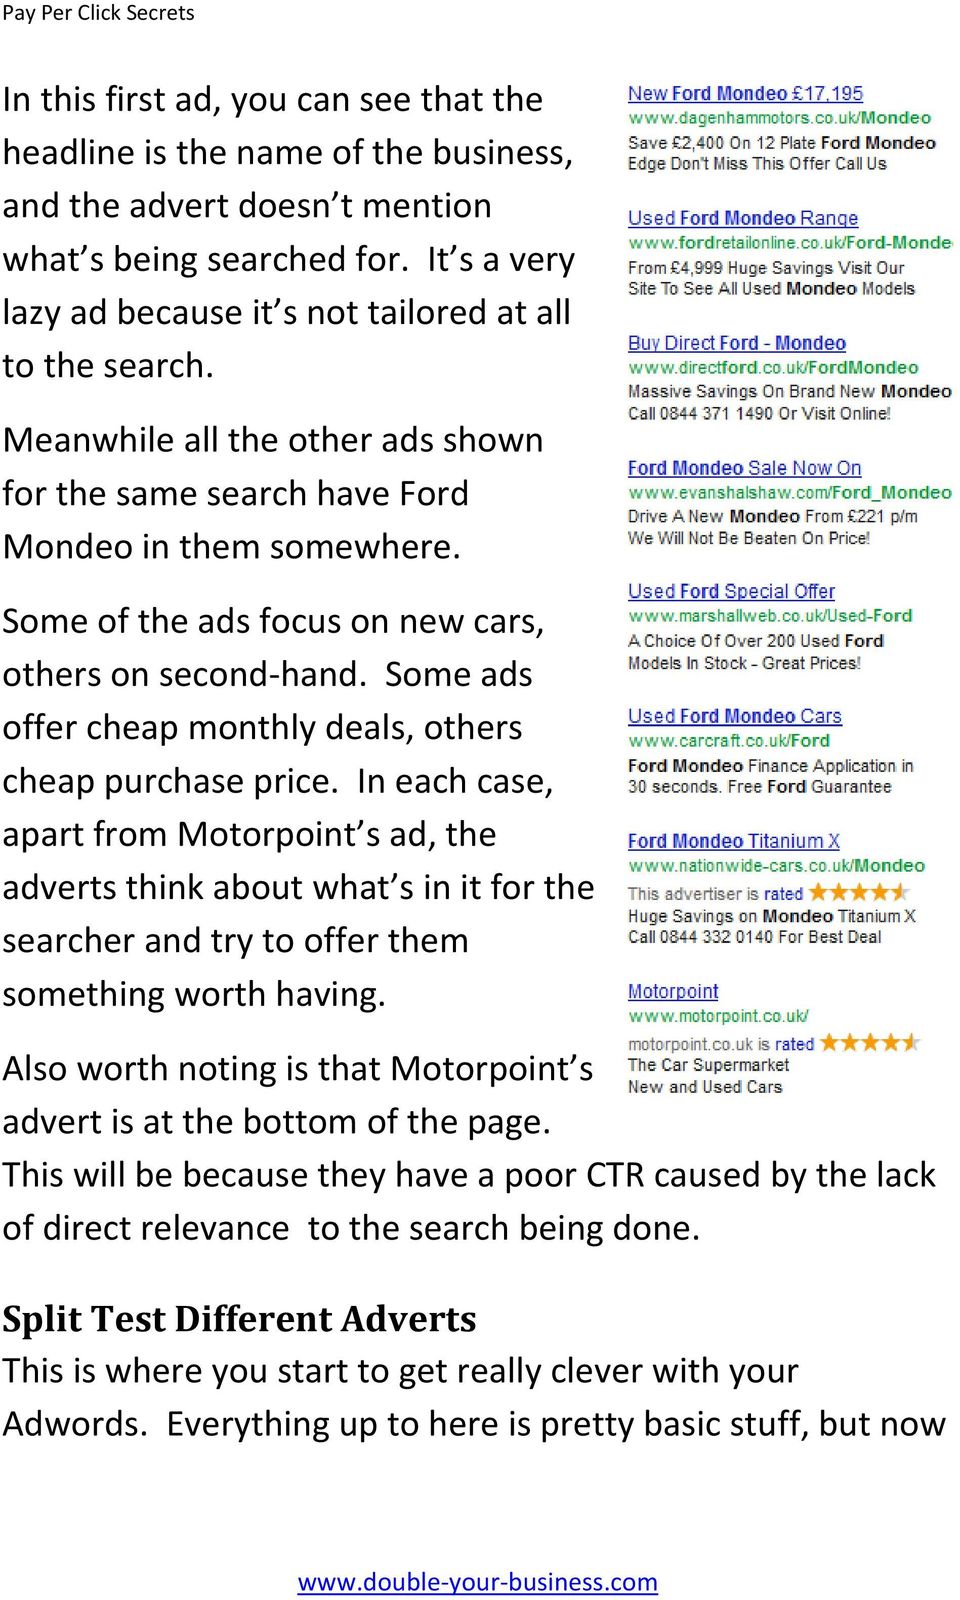 Some of the ads focus on new cars, others on second hand. Some ads offer cheap monthly deals, others cheap purchase price.